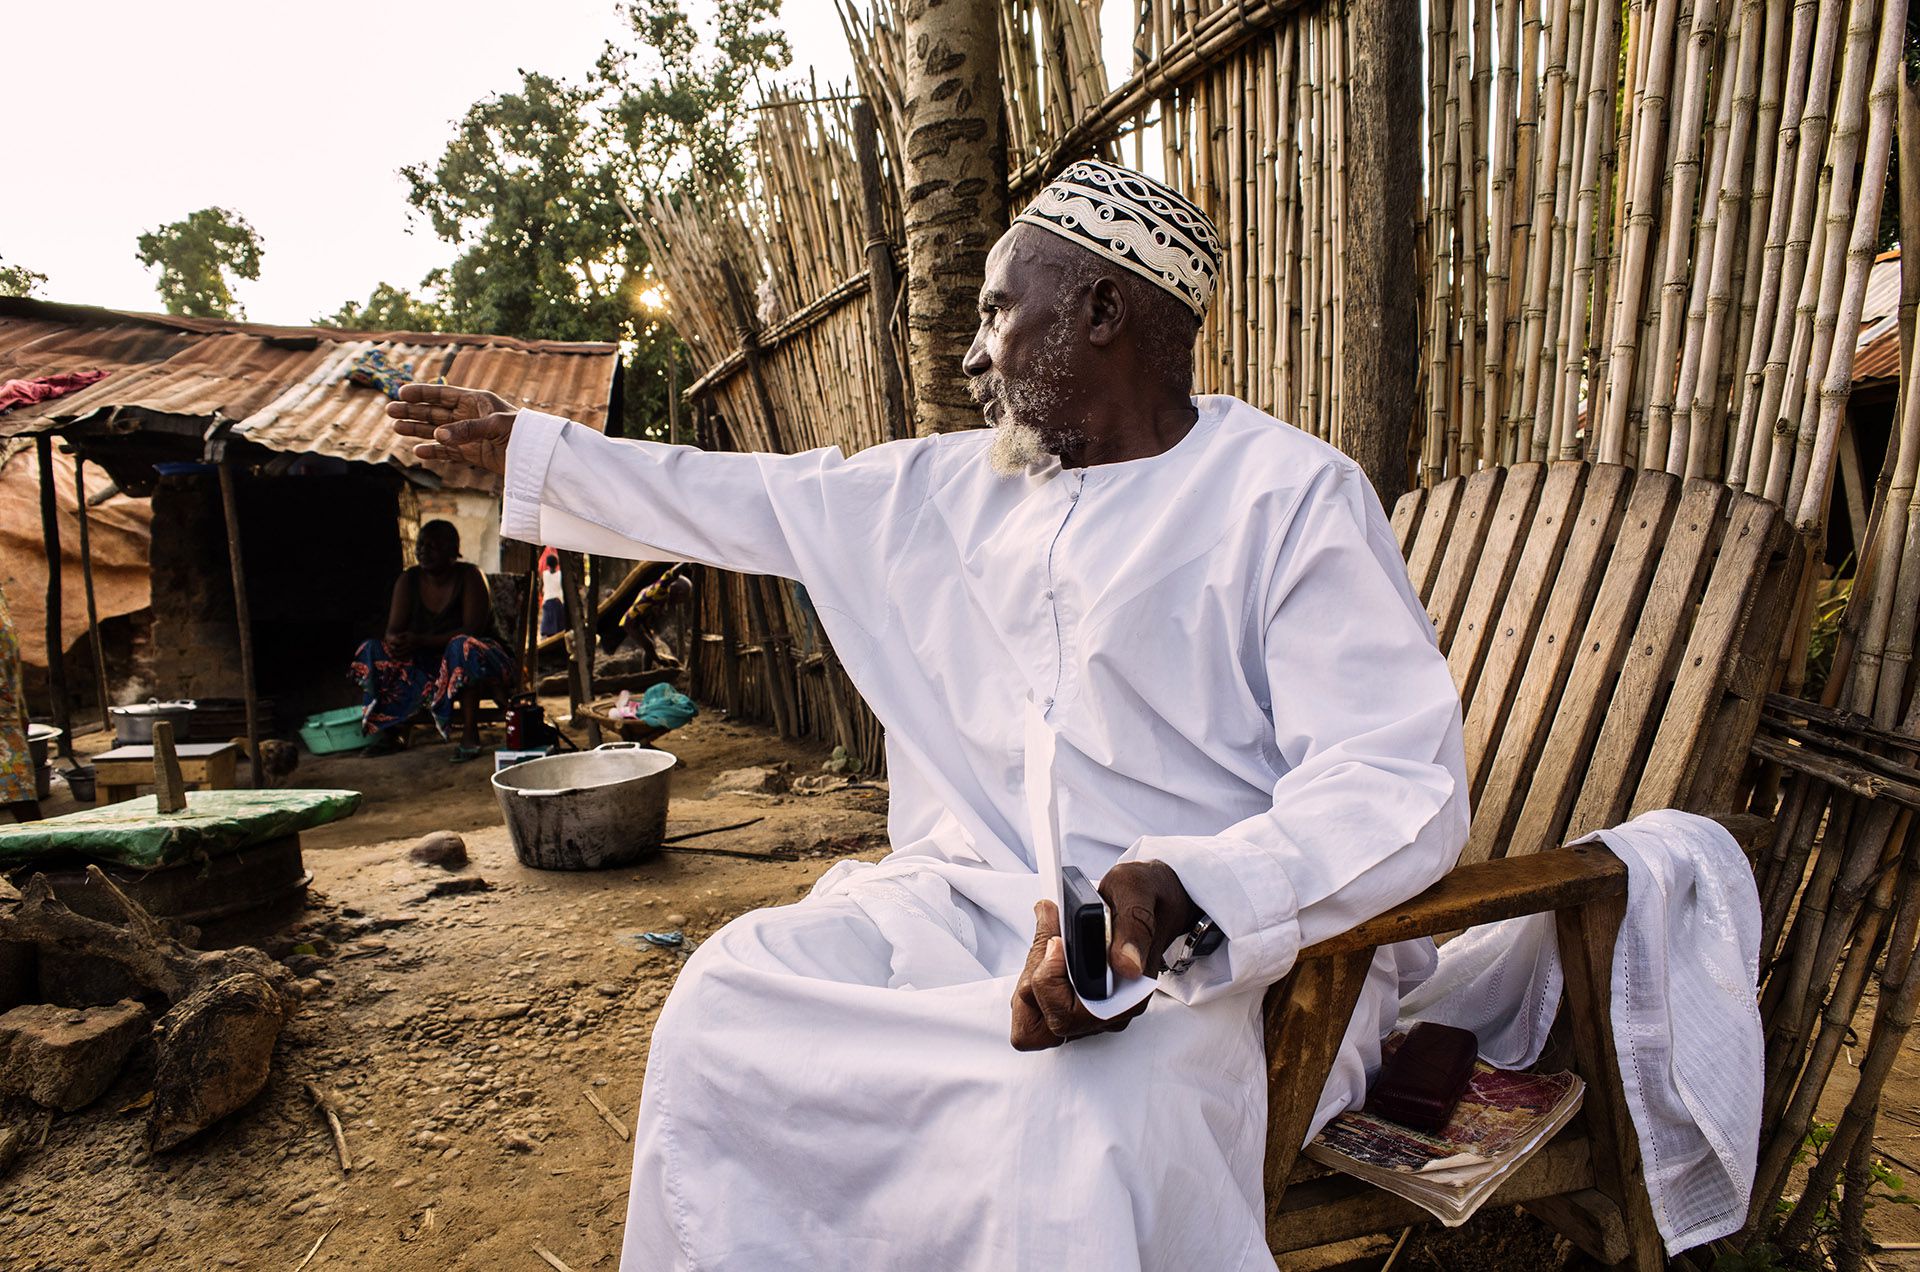 Central African Refugees / DRC As the sun sets, Imam Moussa Bawa, 72, gestures toward his home in Zongo, Equateur Province, DRC on 29 August, 2014. The Imam was born in nearby Libenge, DRC and has lived in Zongo for 34 years. “During the 34 years that I’ve been here, there have never been problems between Christians and Muslims," he says. "In Bangui [capital of neighboring Central African Republic] mosques have been destroyed. I’ve heard that more than 200 mosques have been destroyed in CAR. It’s a political problem. There is a need for reconciliation, and I’m ready to help." Conflict in CAR has caused more than a million people to flee their homes, one-quarter of them crossing an international border in their search for safety. Inter-communal violence between Christians and Muslims in CAR has further complicated the situation, for both those still inside the country, and for refugees abroad. UNHCR / B. Sokol / August 2014